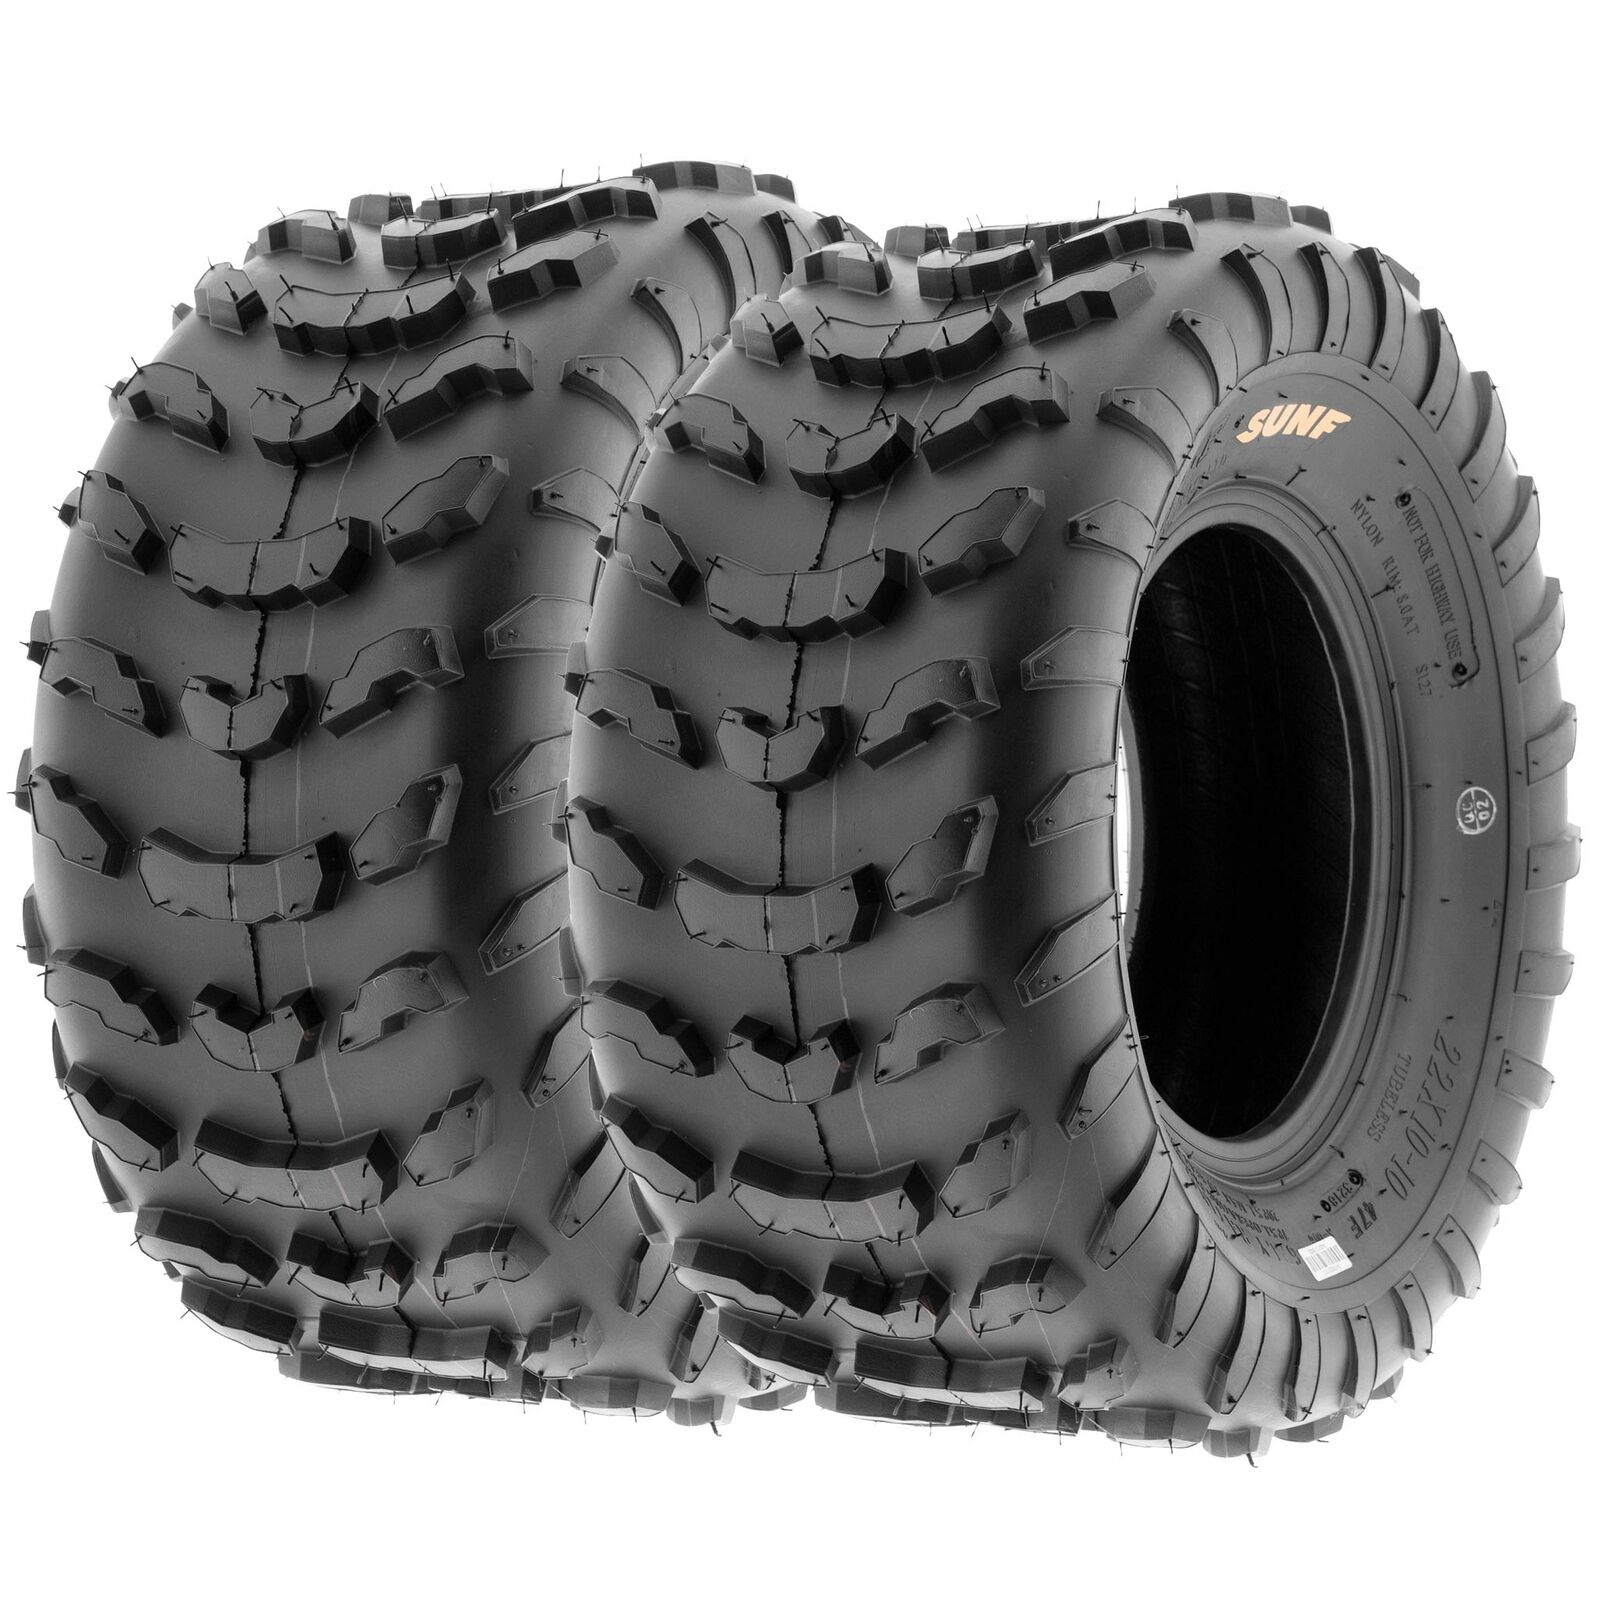 Pair of 2, 22x10-10 22x10x10 Quad ATV All Terrain AT 6 Ply Tires A006 by SunF